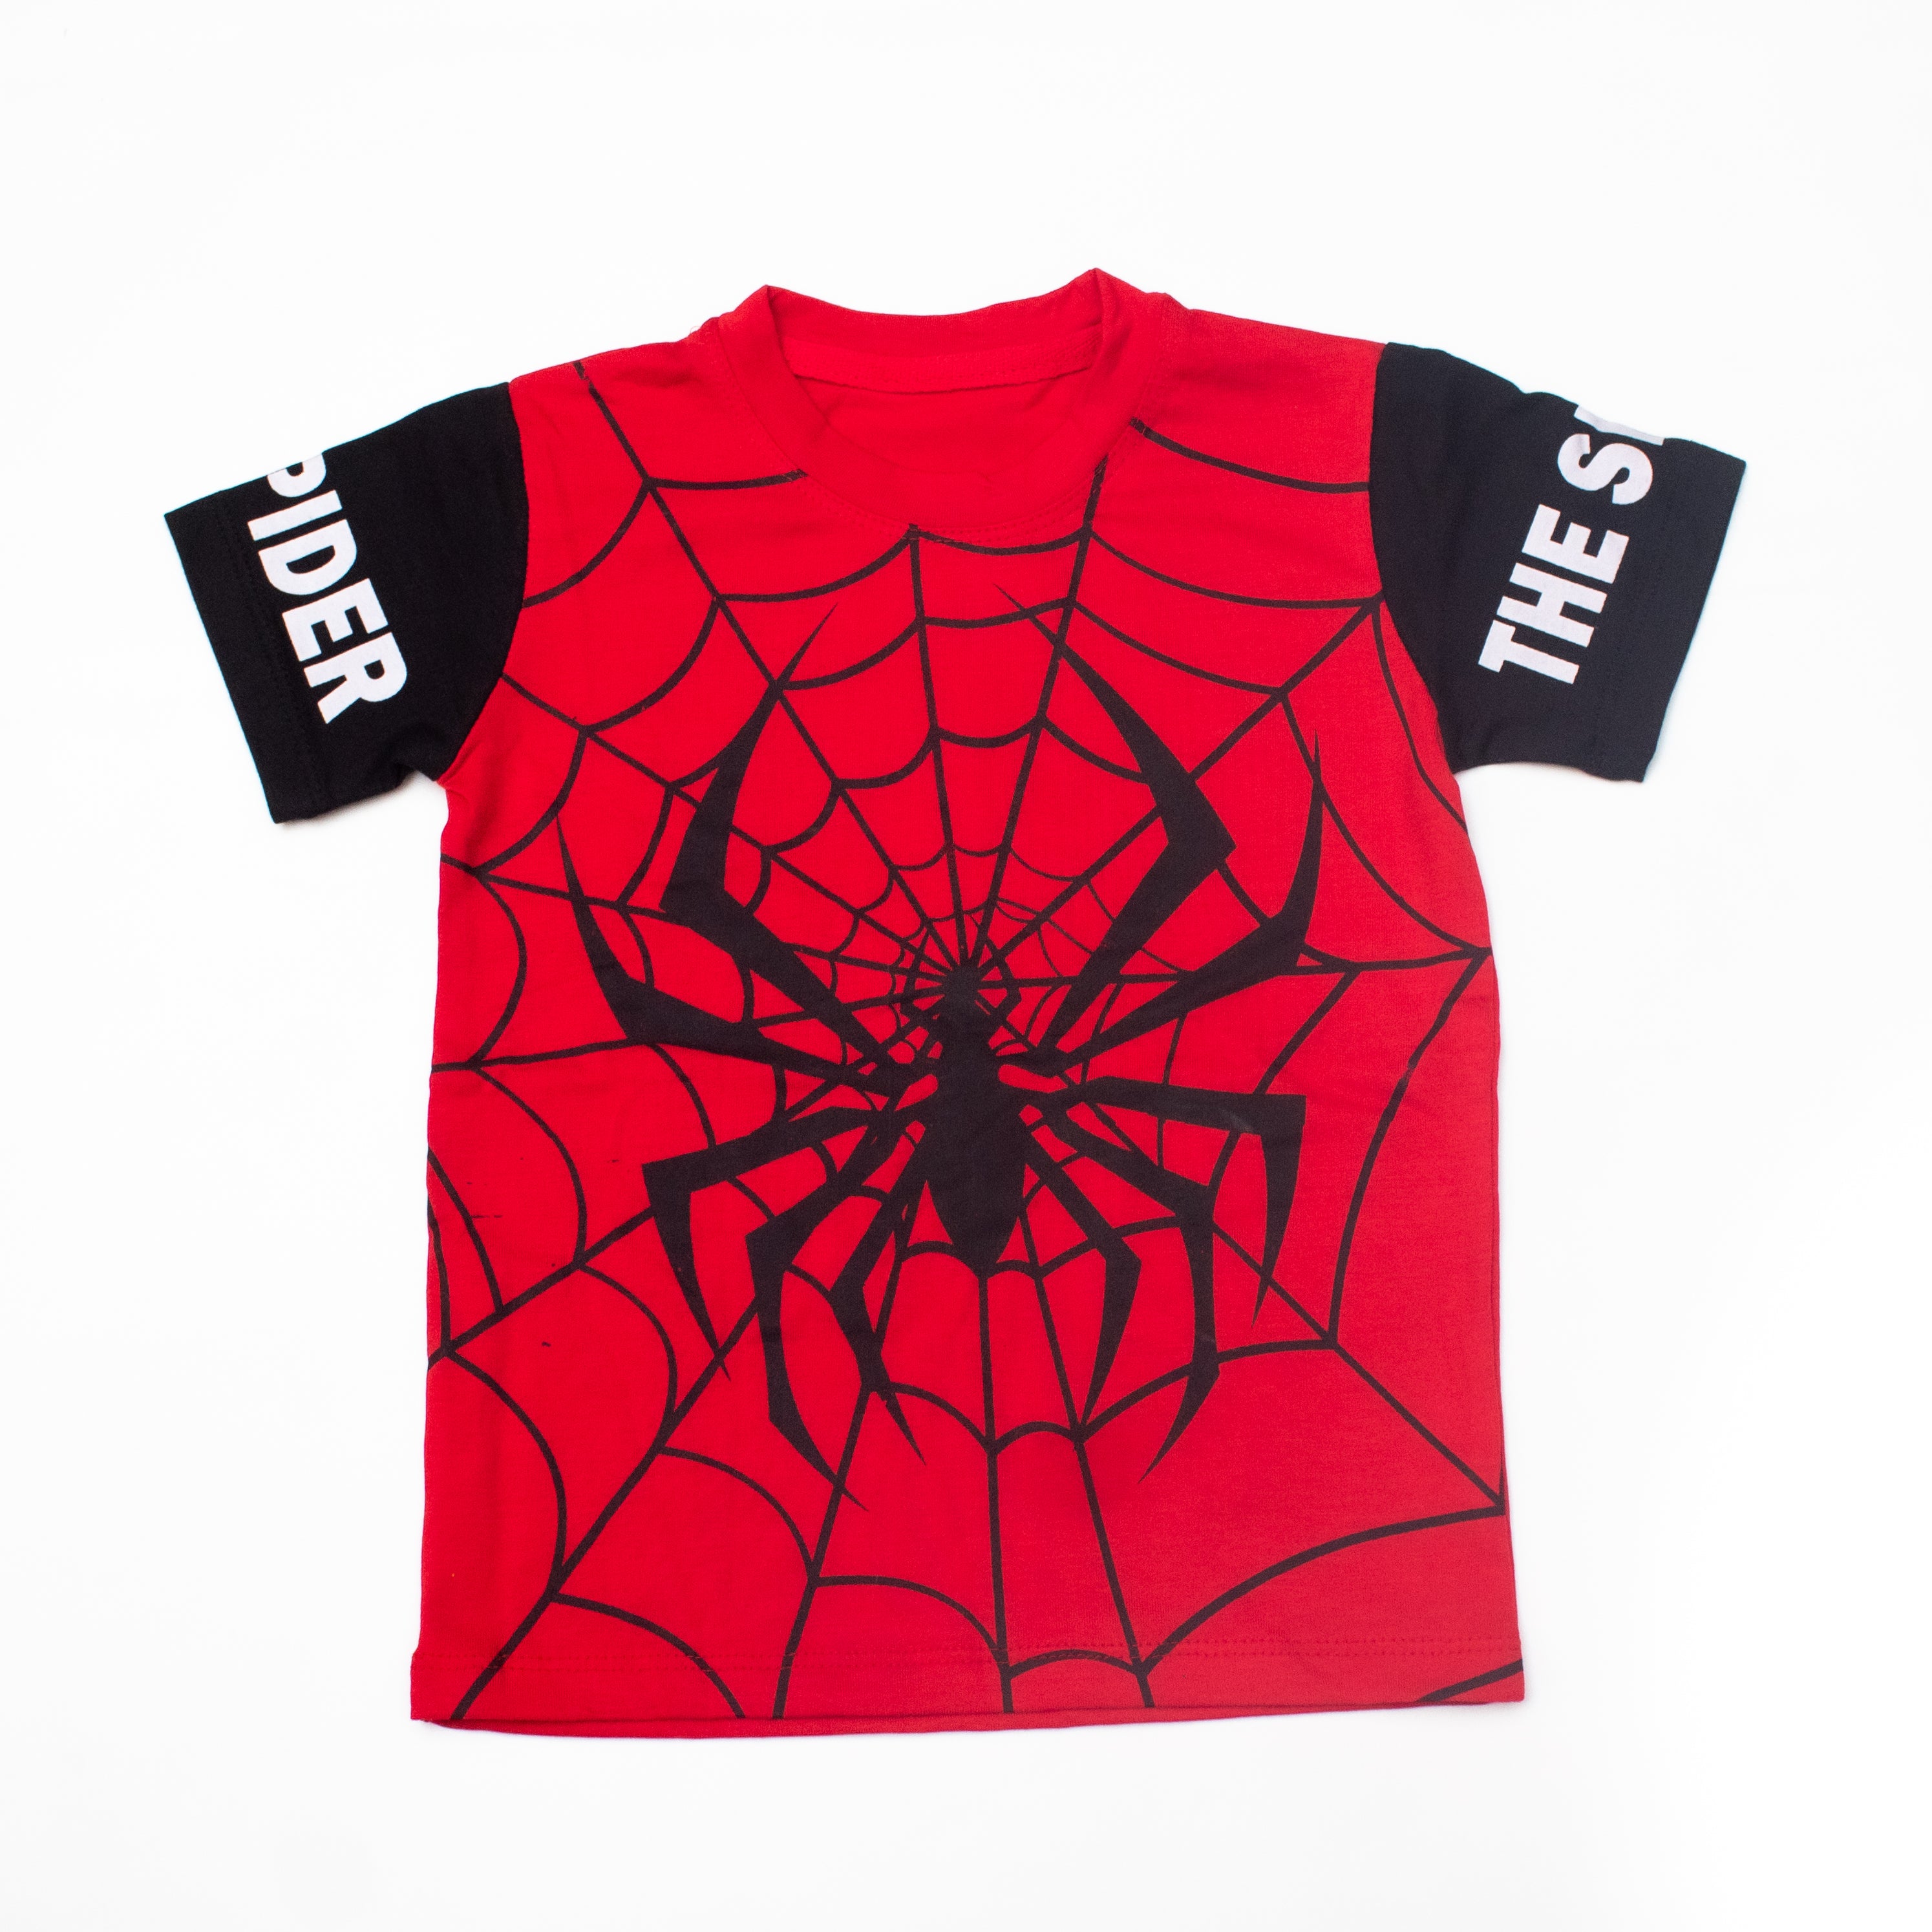 Spiderman Red T-Shirt And Shorts For Kids